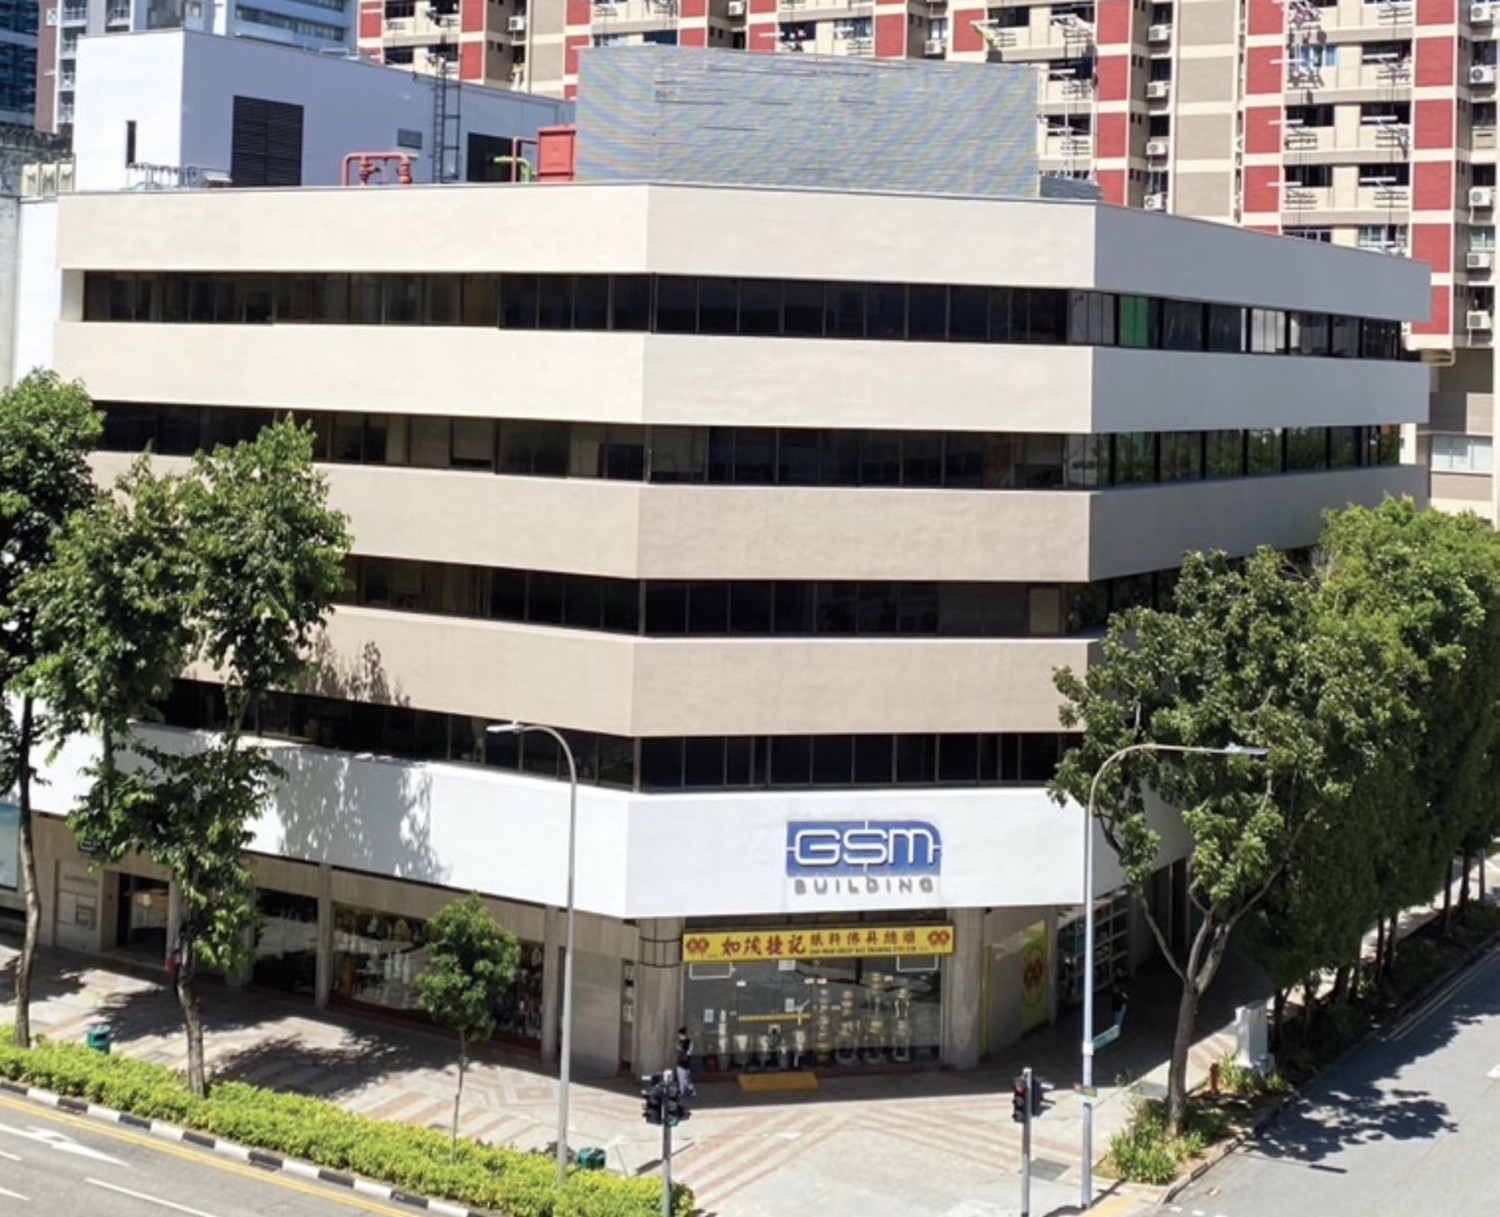 LHN to buy GSM Building for $80 million to expand serviced residences offering - Property News